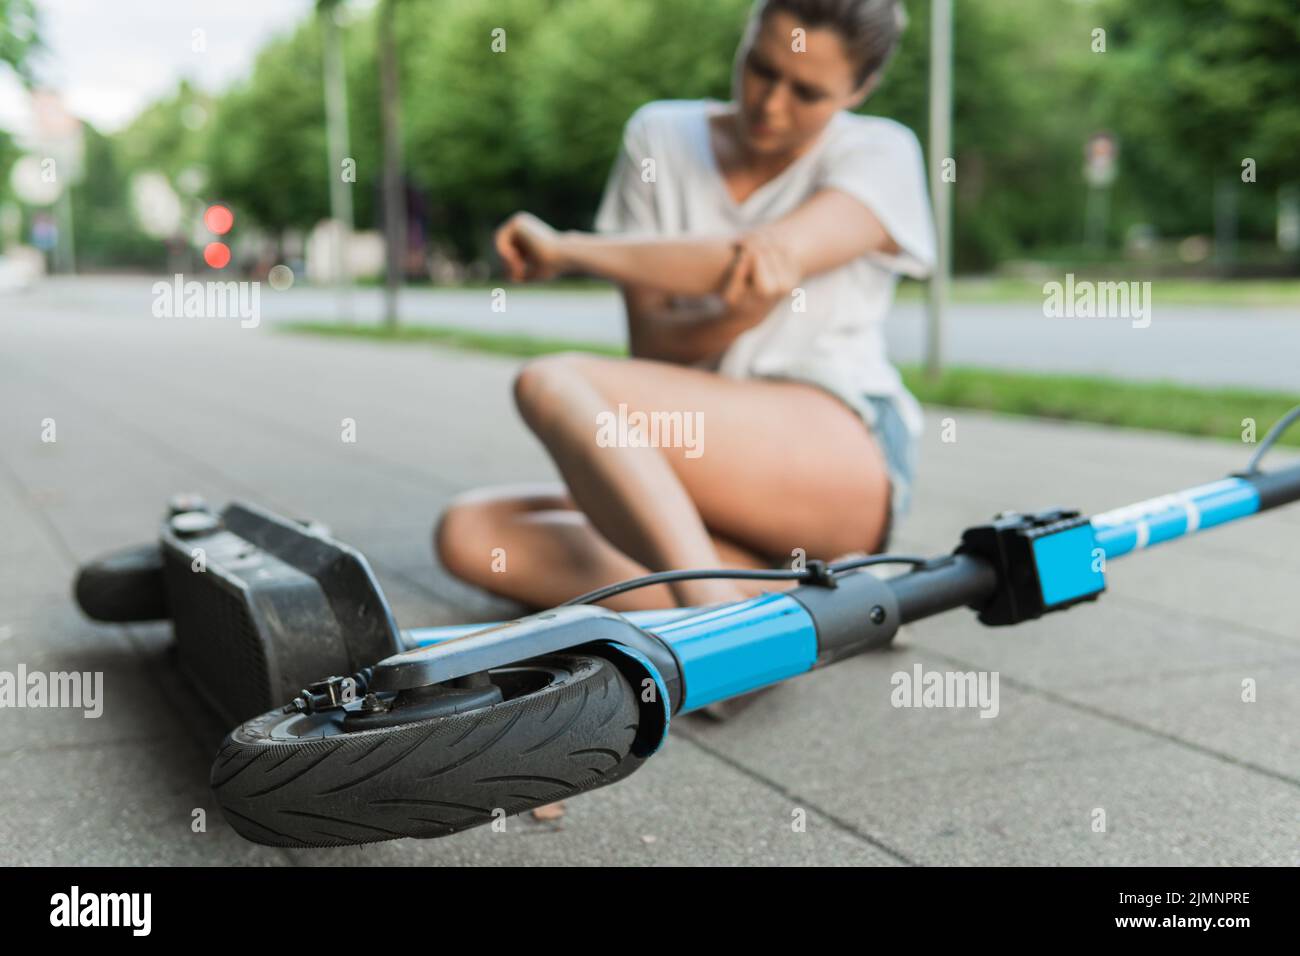 Young woman suffering from elbow pain after e-scooter riding accident Stock Photo